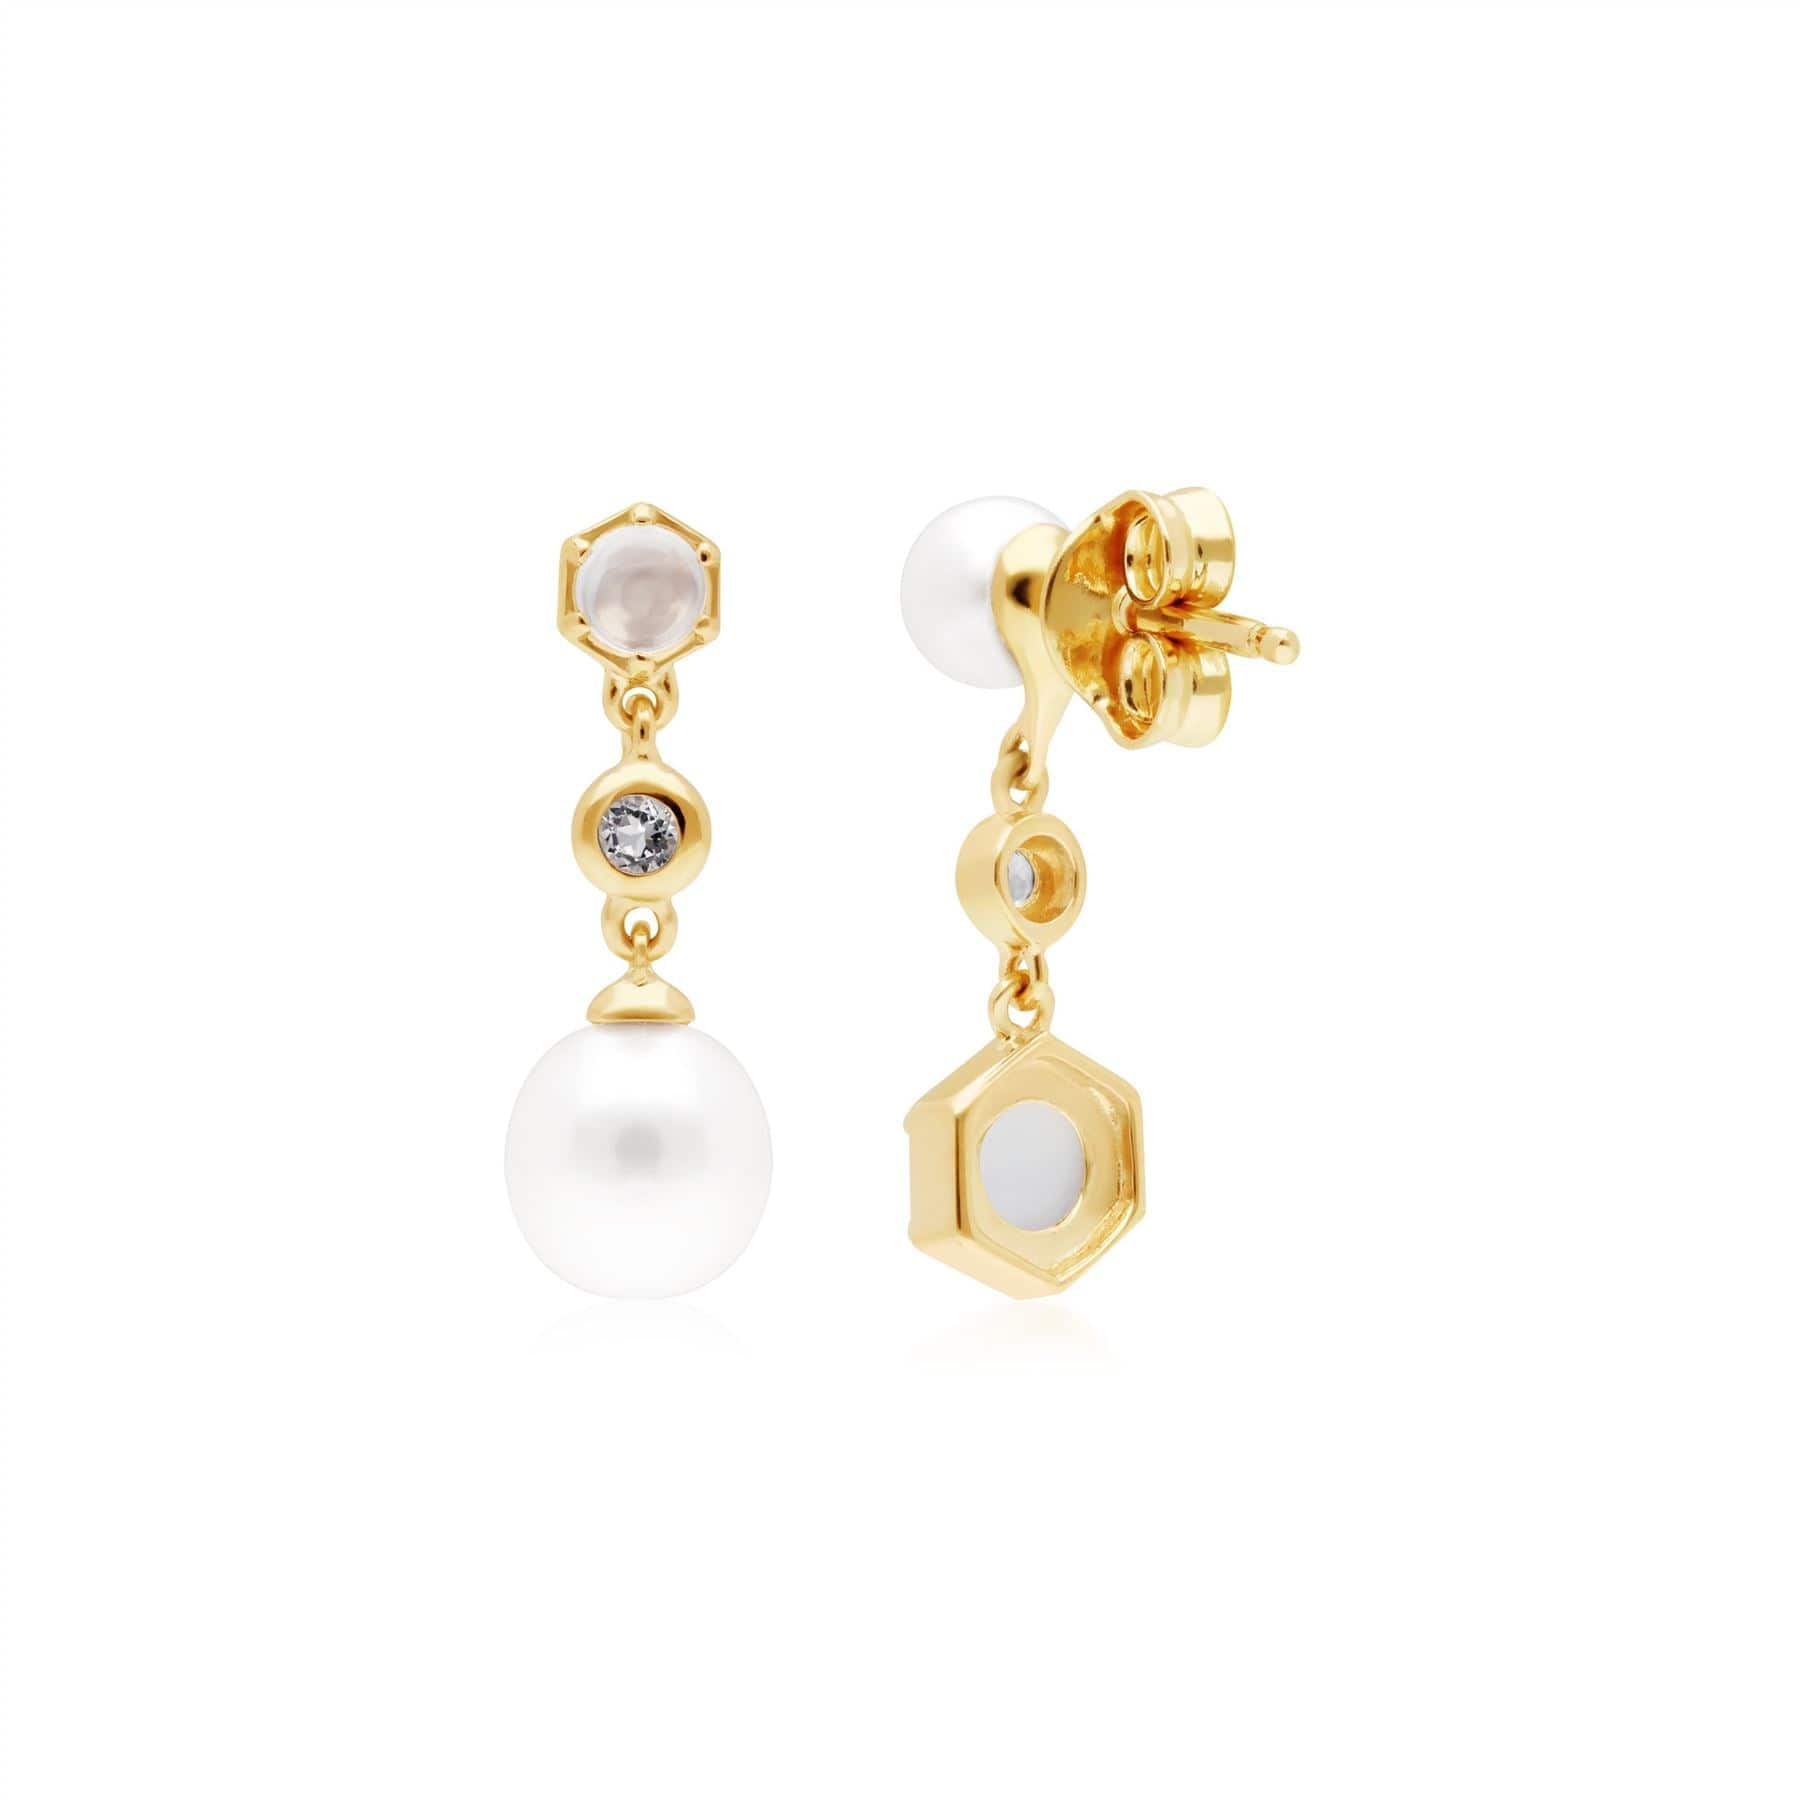 Modern Pearl, Moonstone & Topaz Mismatched Drop Earrings in Gold Plated Silver 2